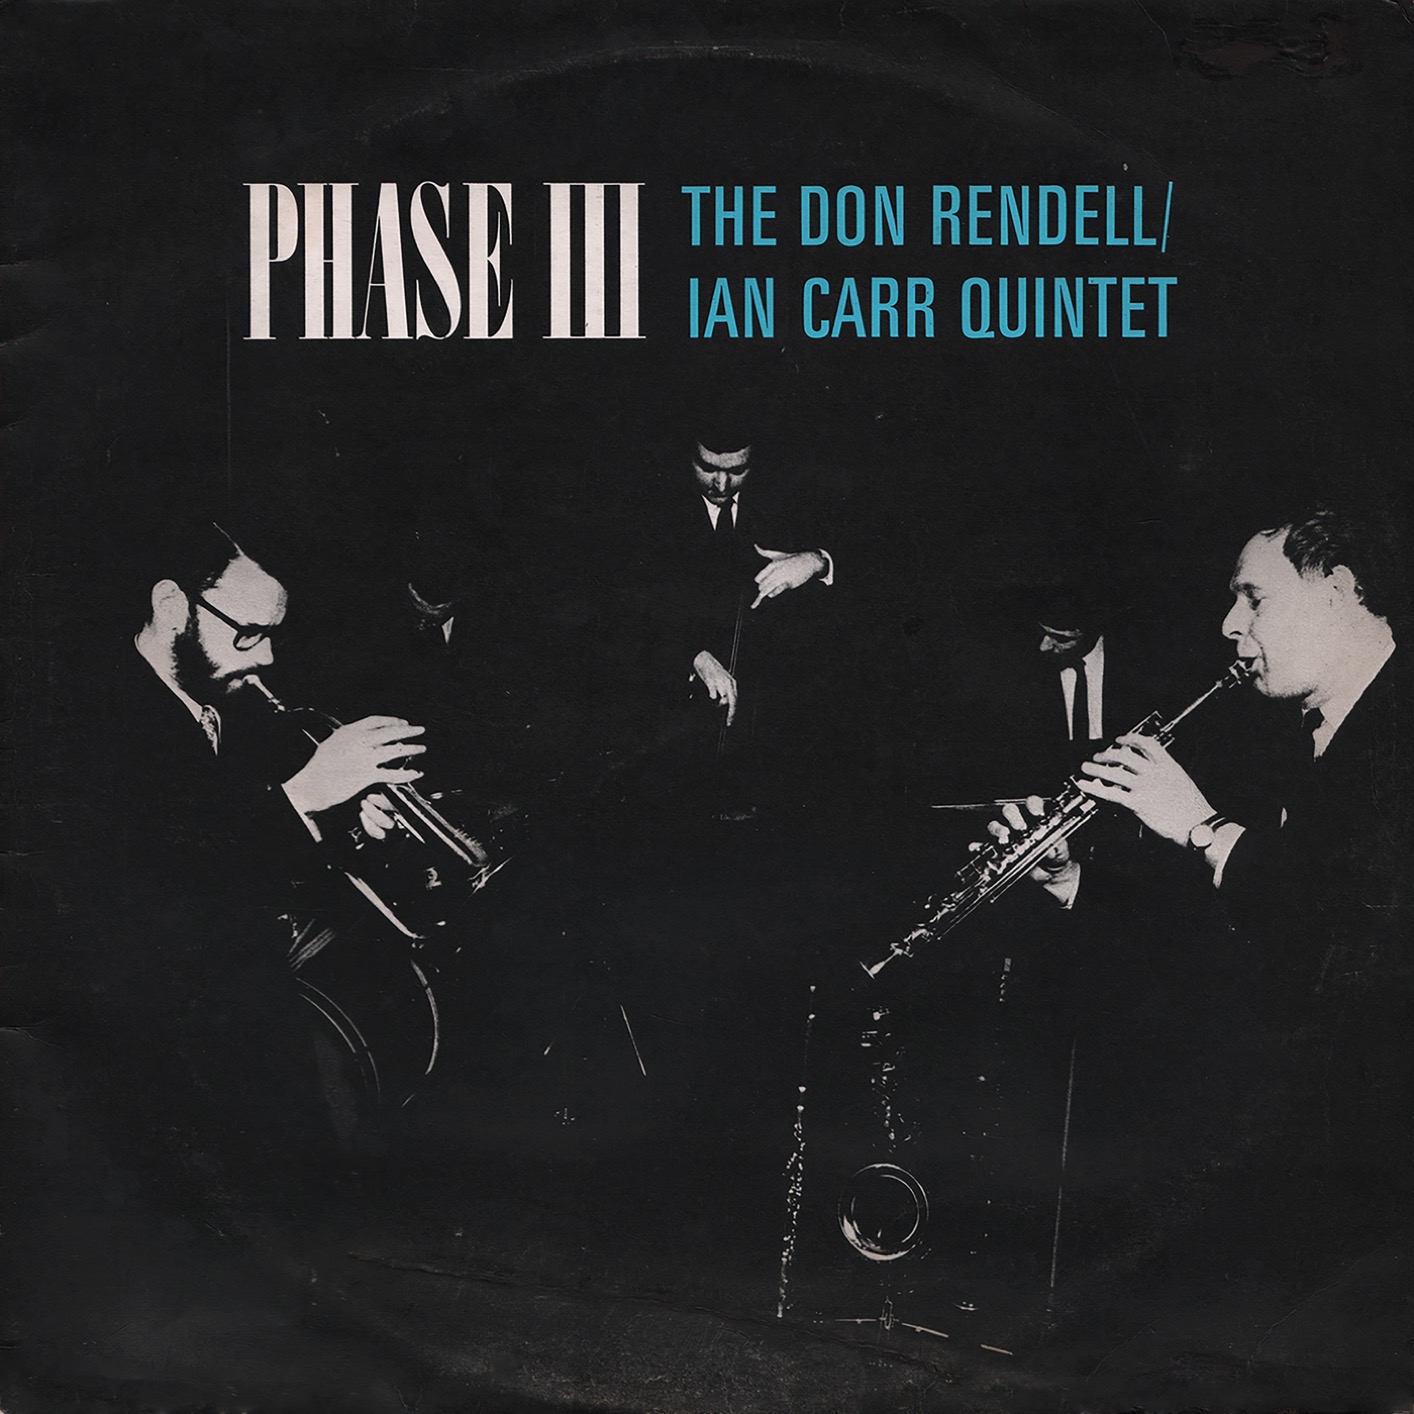 The Don Rendell / Ian Carr Quintet – Phase III (1968/2018) [FLAC 24bit/96kHz]